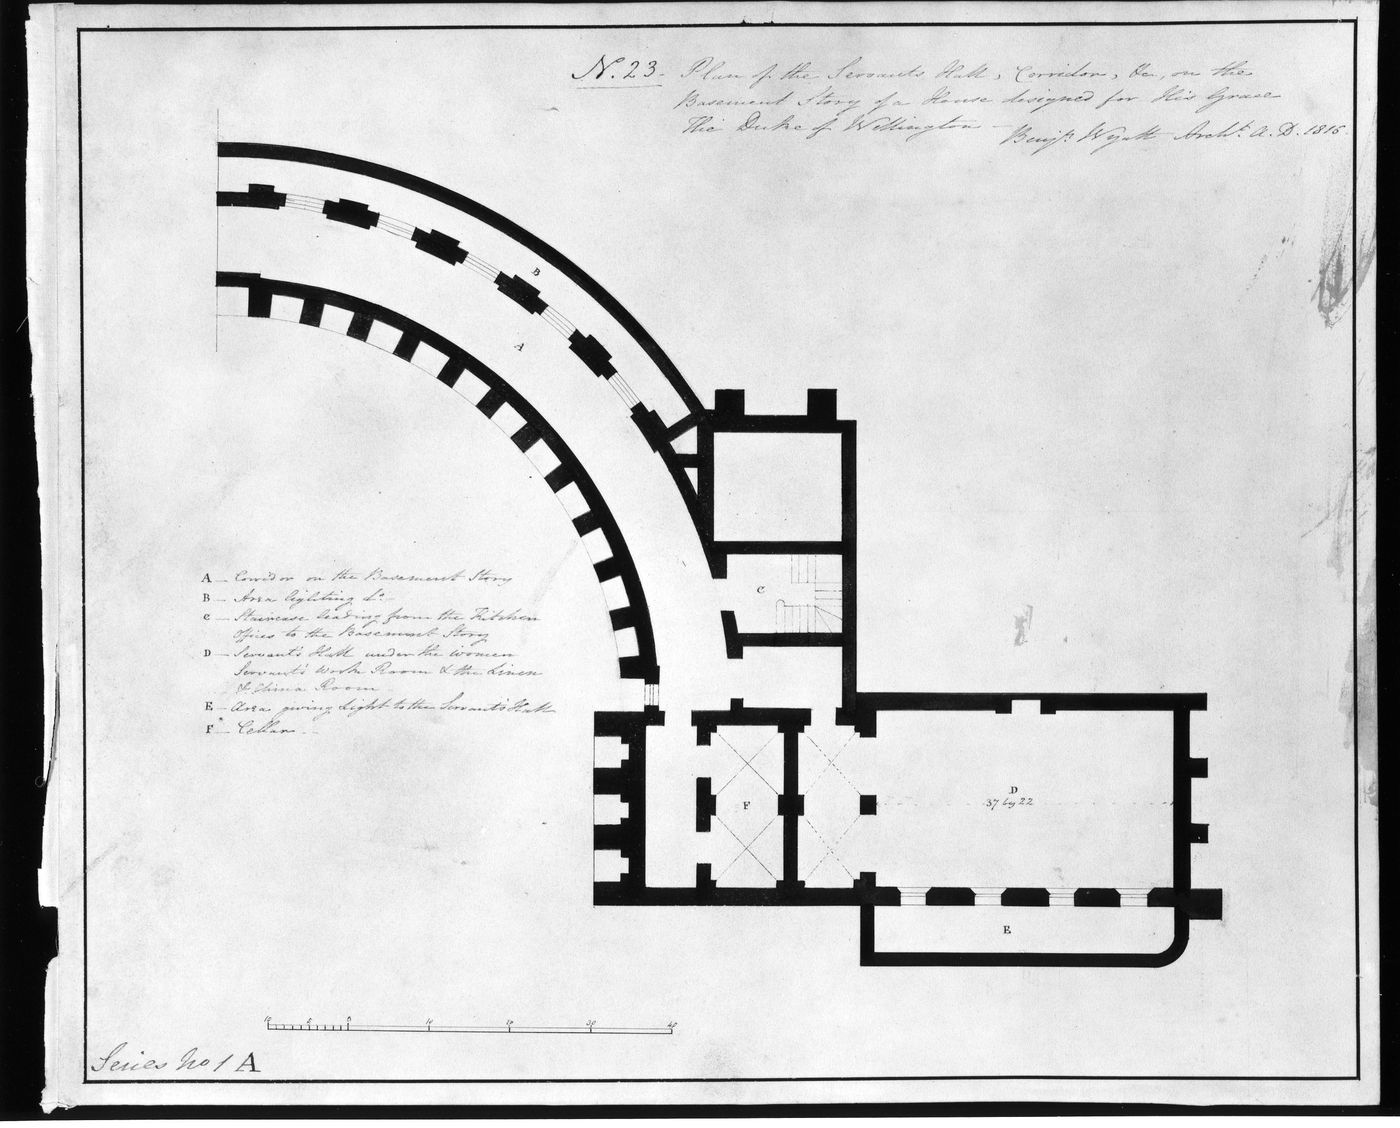 Plan of the servants' hall and corridor of the basement storey, Waterloo Palace (Series 1A)